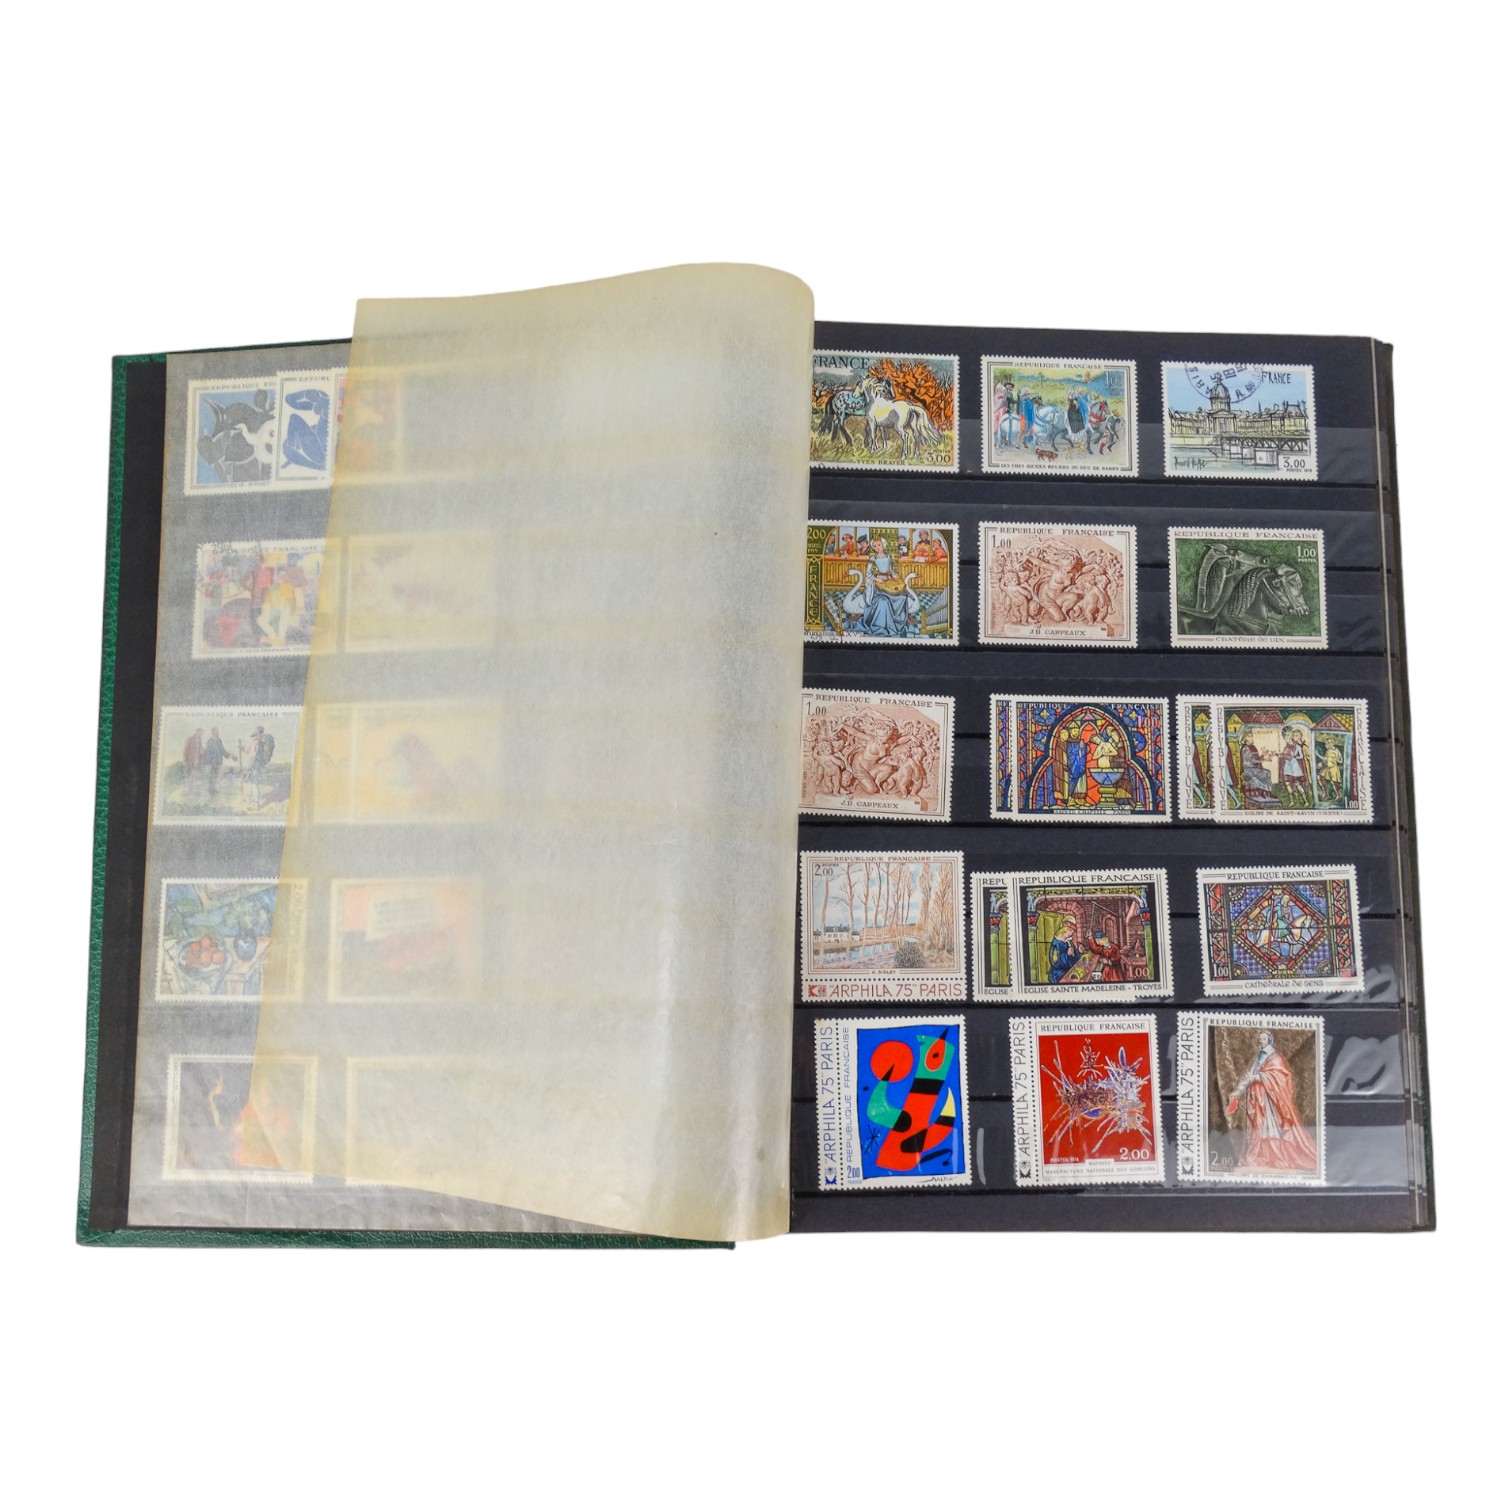 ART STAMPS OF FRANCE, ISREAL, JAPAN - INCLUDES MANY MINT - A green stock book full of art stamps